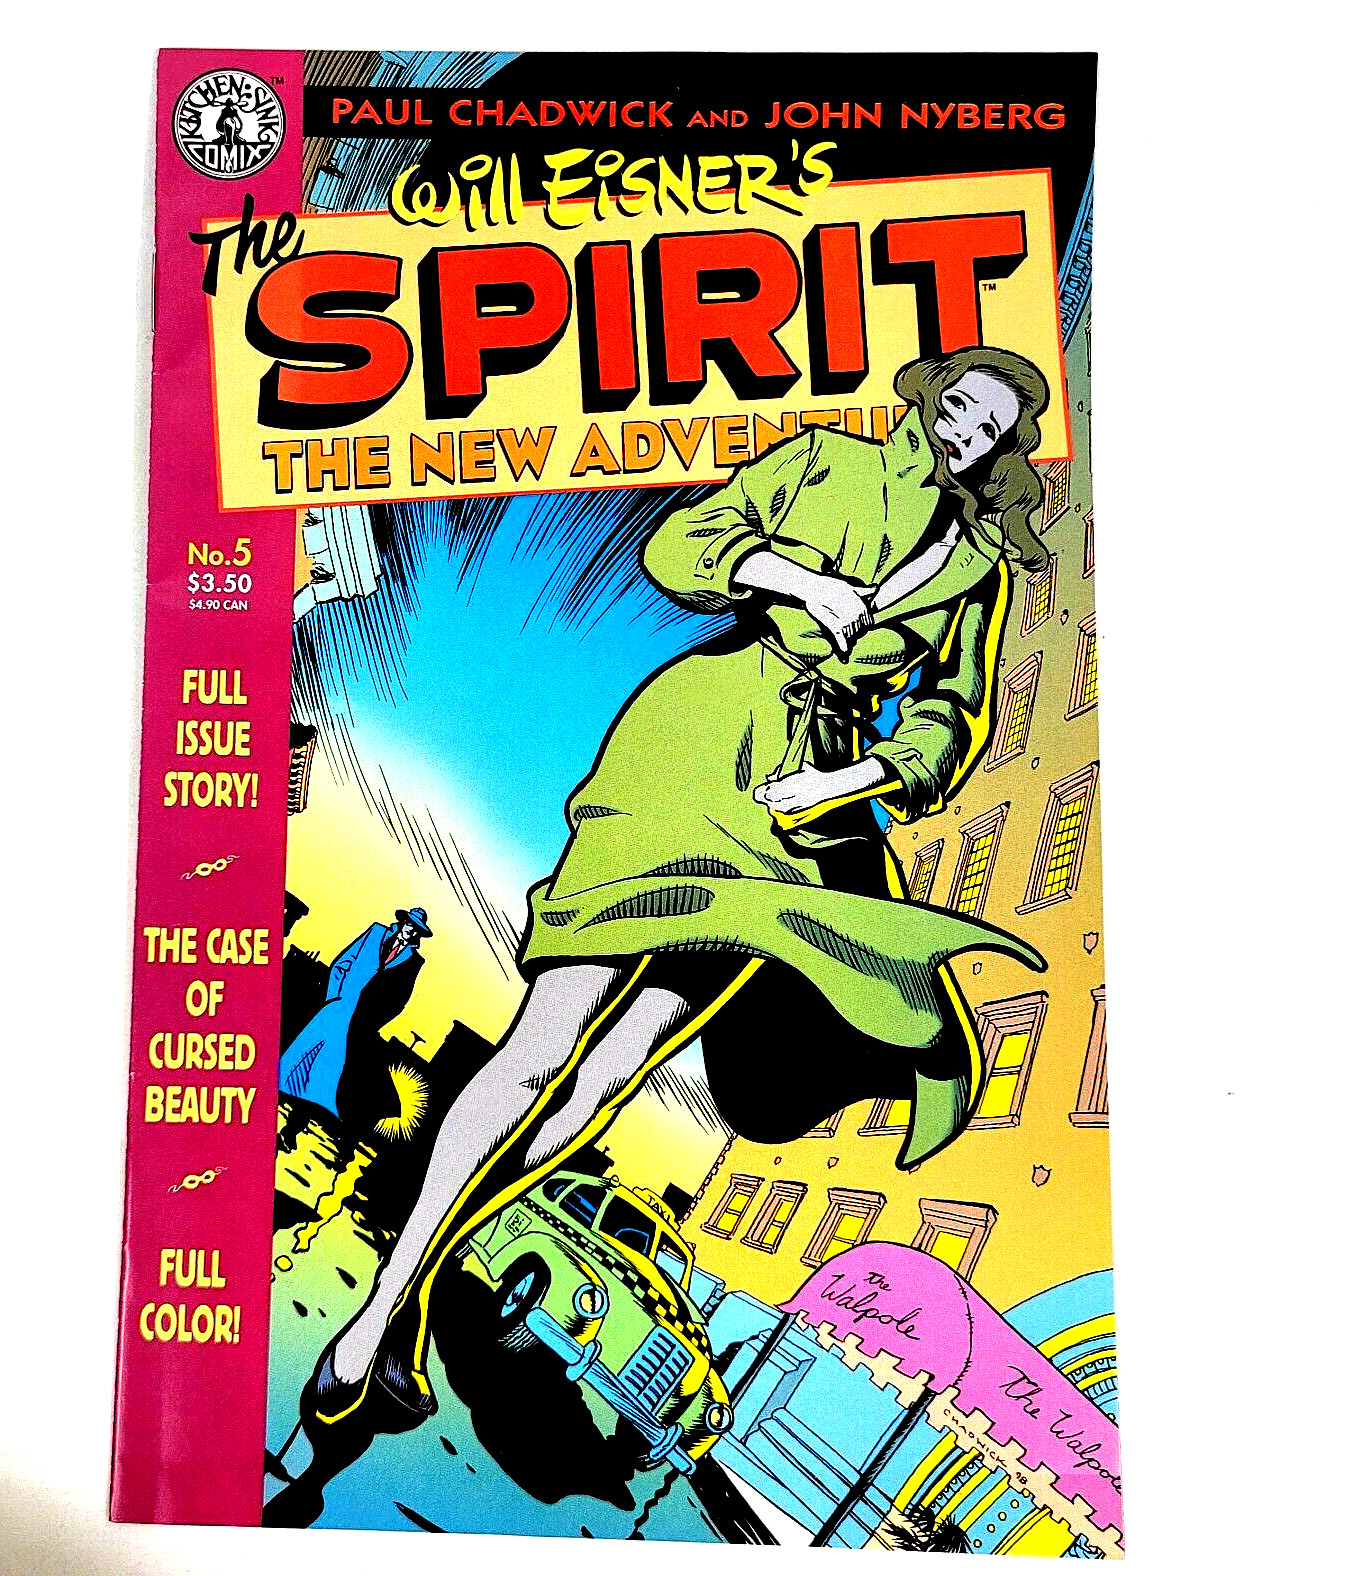 Will Eisners The Spirit The New Adventures # 5  - Paul Chadwick 1998